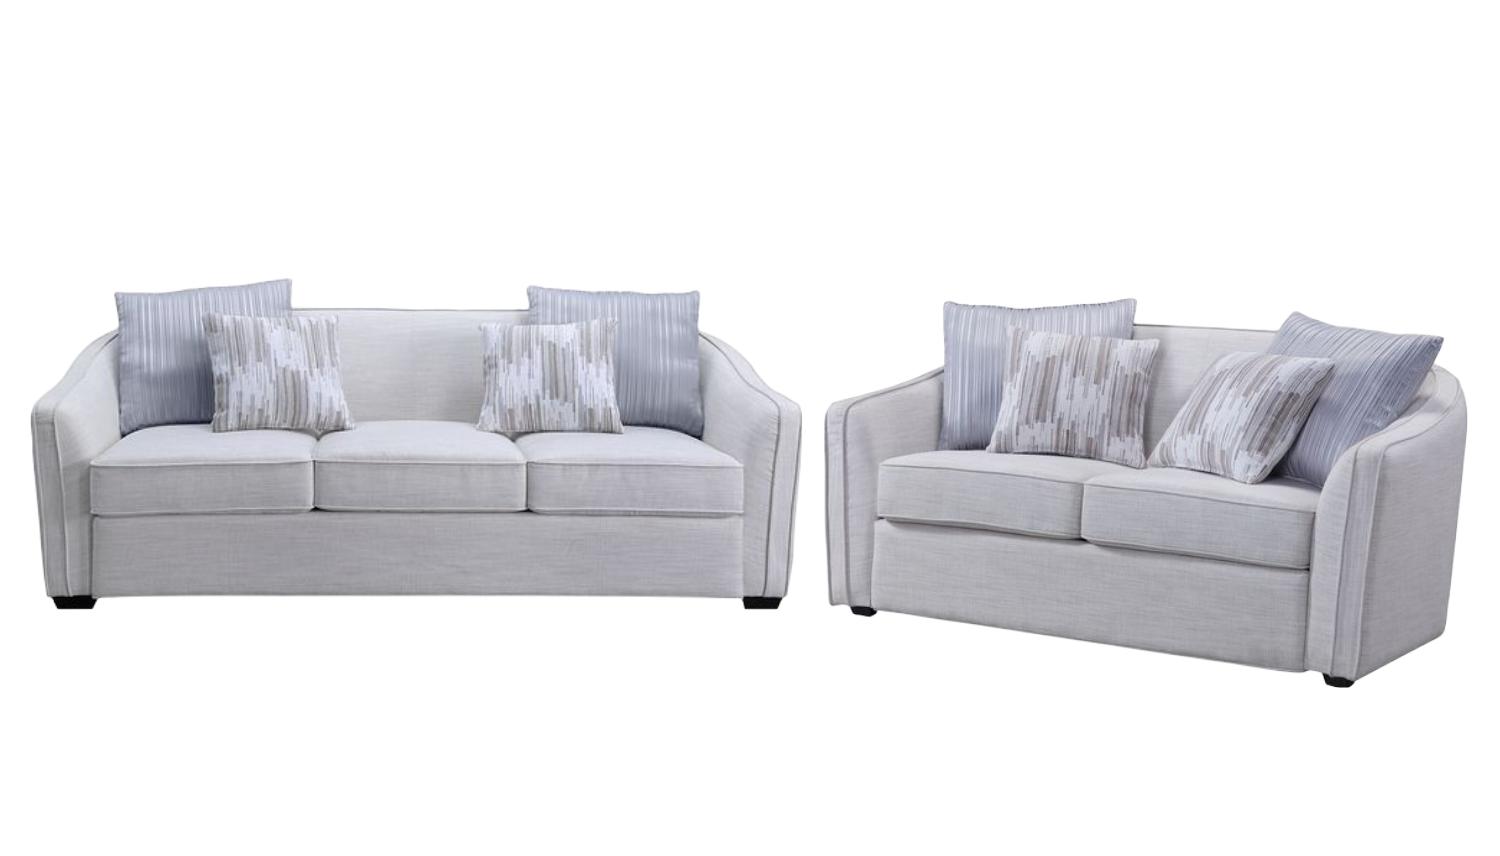 

    
Contemporary Beige Linen Sofa + Loveseat + Chair by Acme Mahler II LV00485-3pcs
